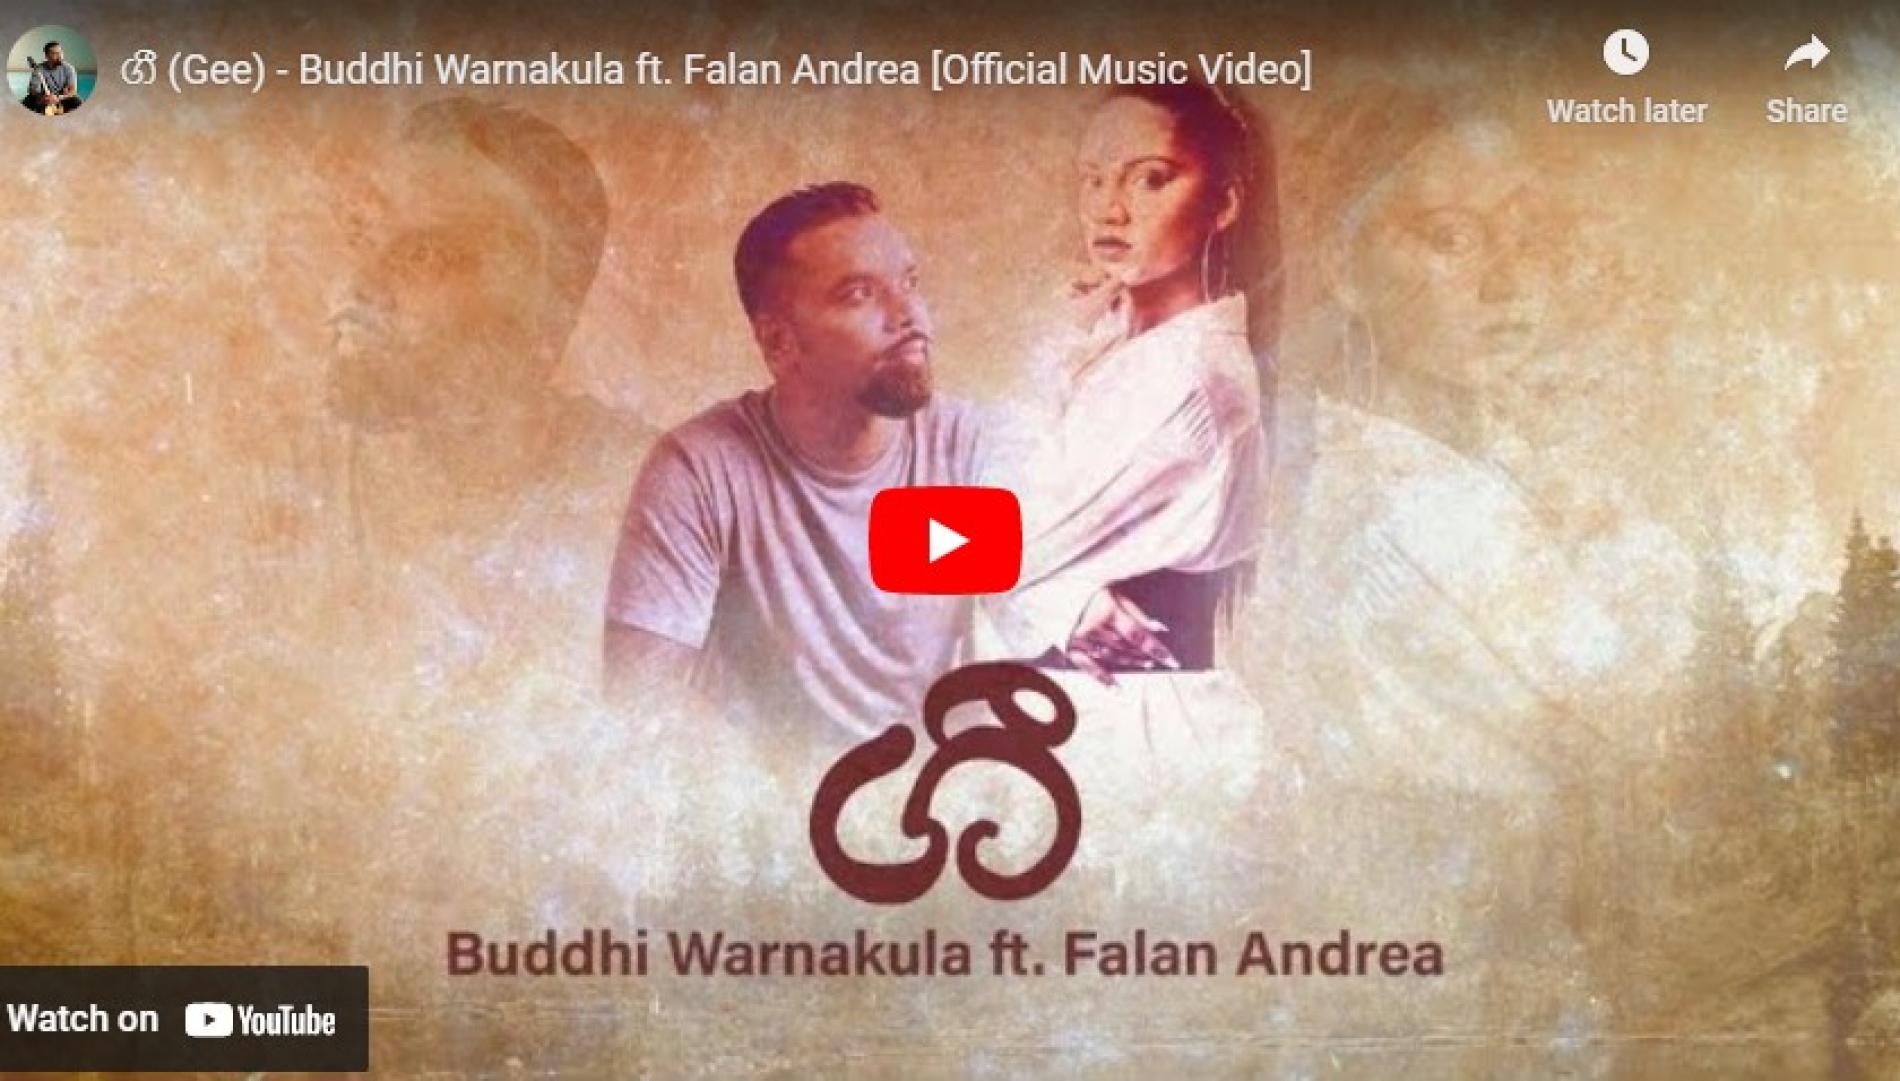 New Music : ගී (Gee) – Buddhi Warnakula ft. Falan Andrea [Official Music Video]